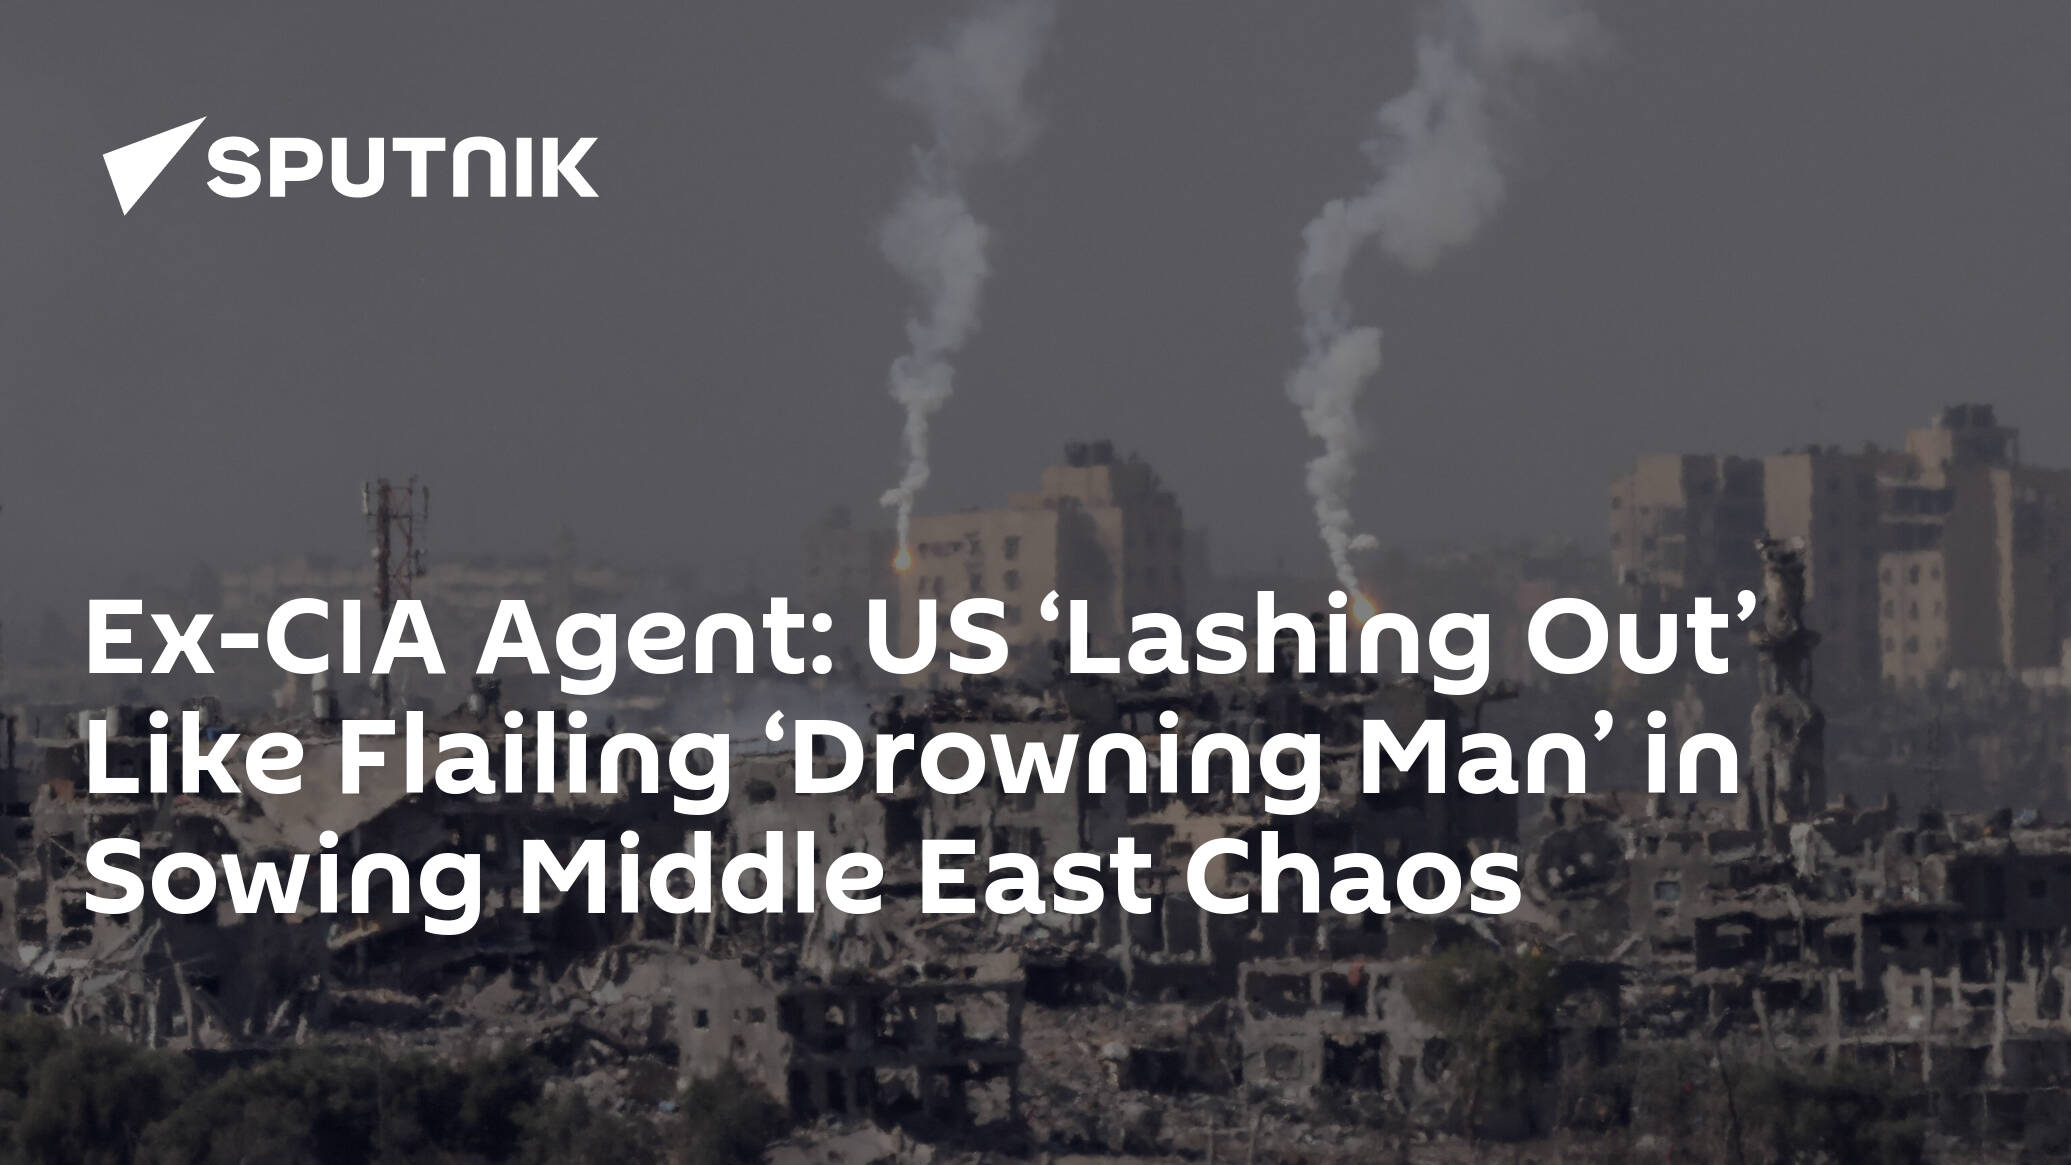 Ex-CIA Agent: US ‘Lashing Out’ Like Flailing ‘Drowning Man’ in Sowing Middle East Chaos